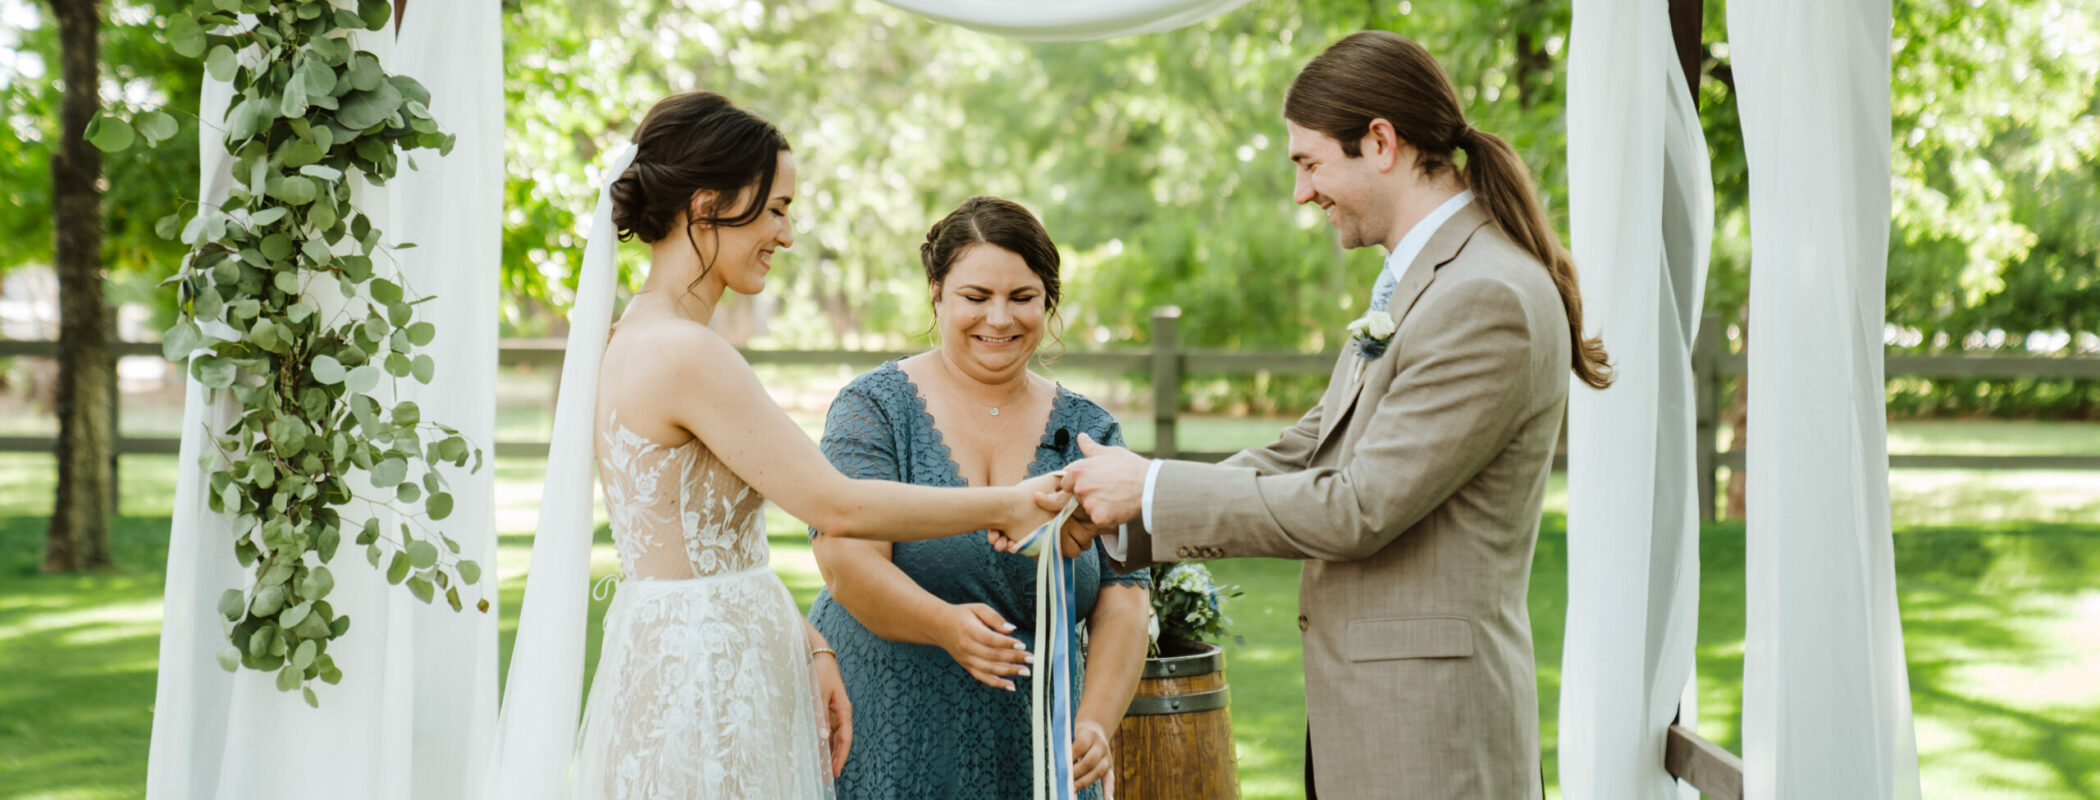 Different Types Of Unity Ceremonies To Consider For Your Big Day! featured image